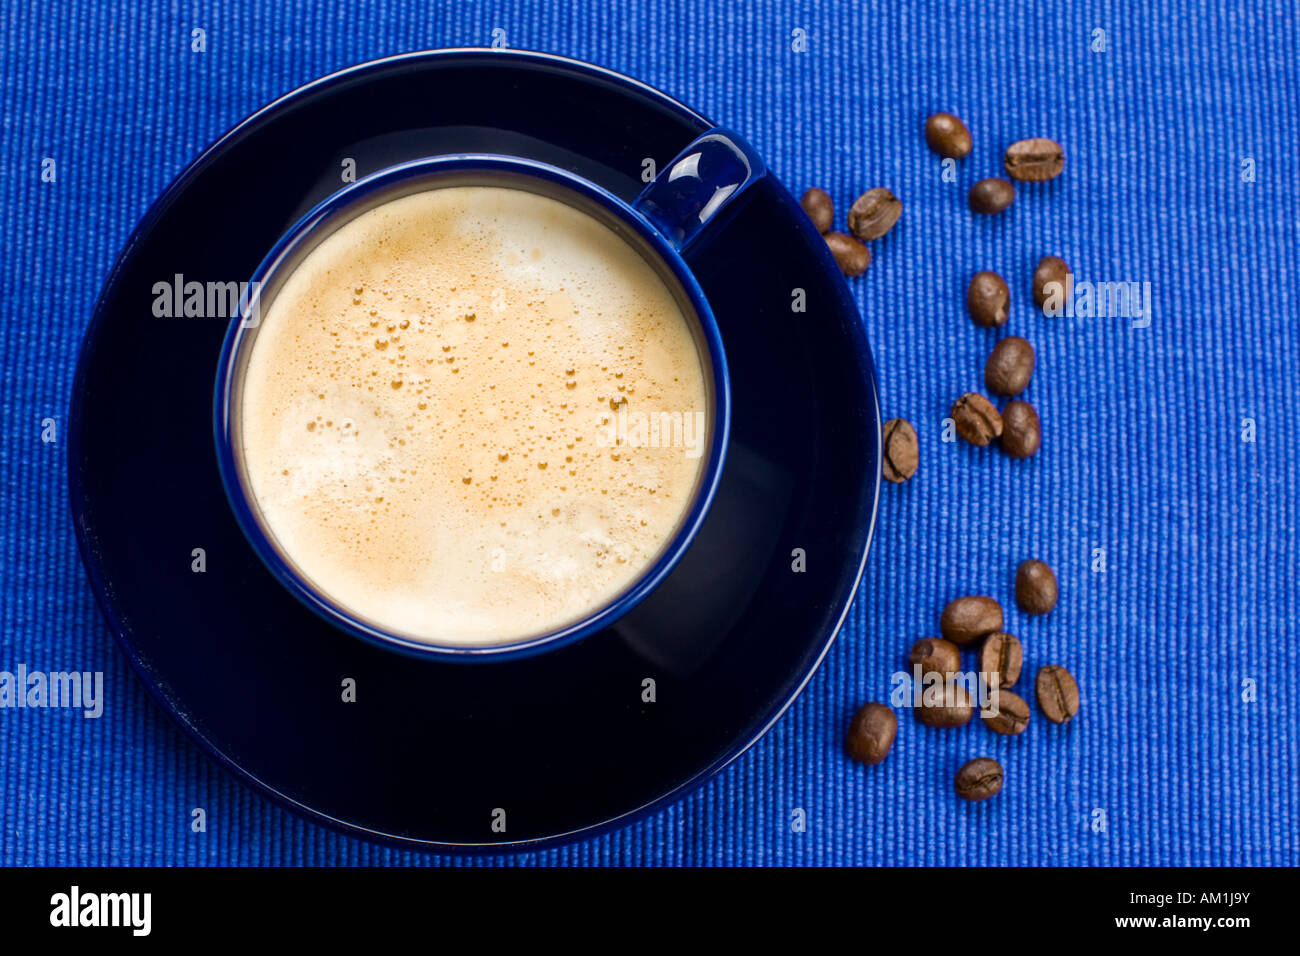 Cup of coffee in blue Stock Photo